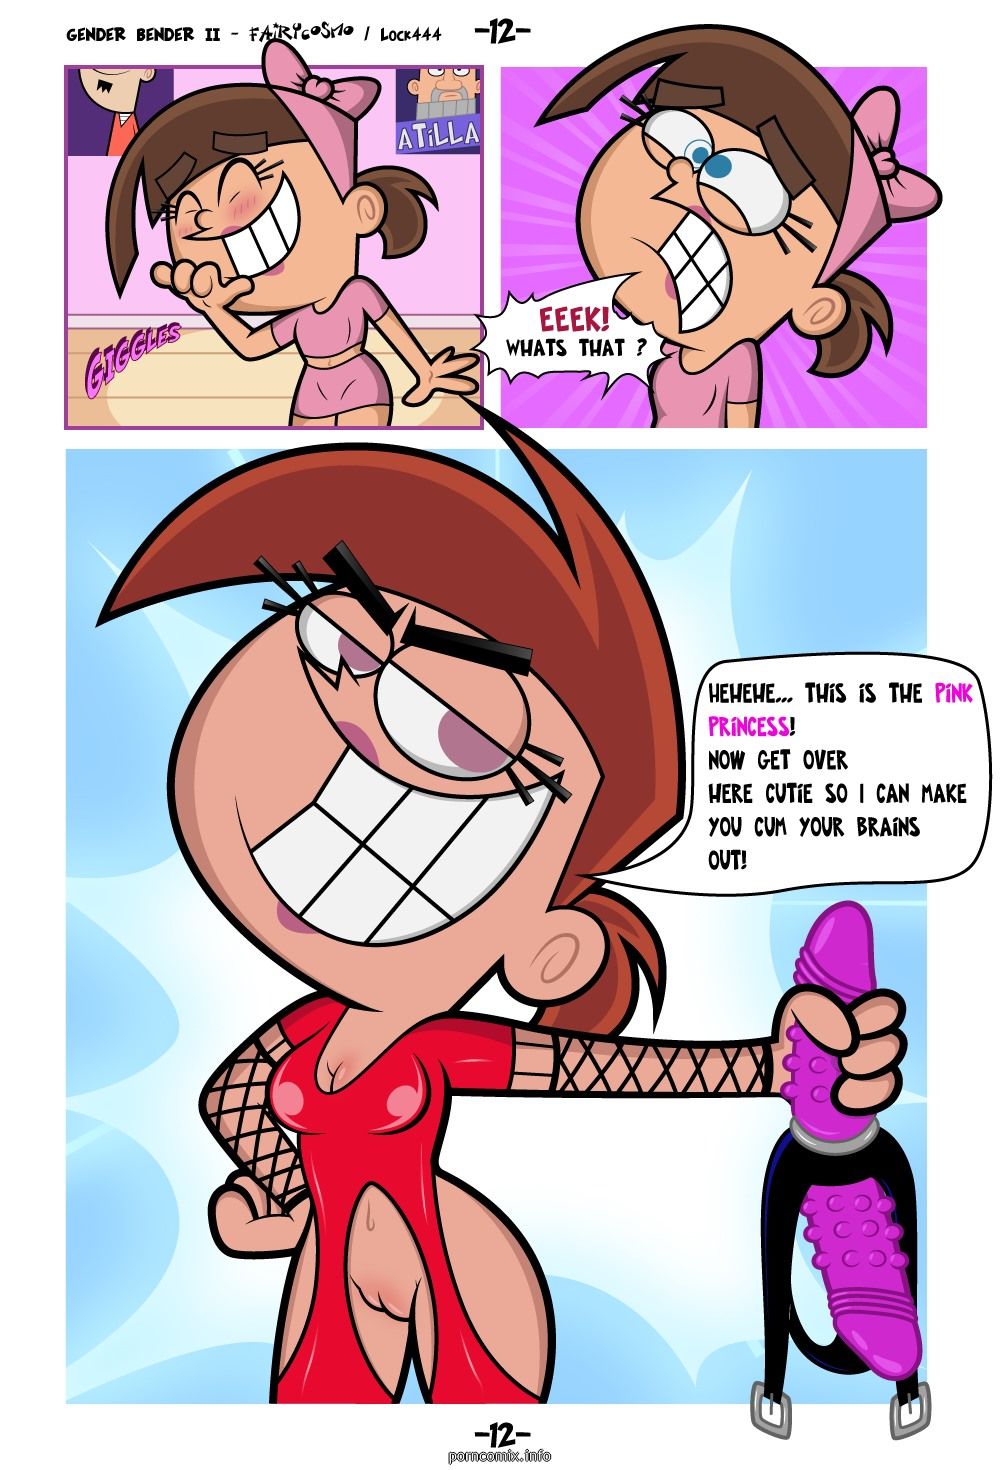 1000px x 1470px - Fairly OddParents Gender Bender II [FairyCosmo] Page 13 - Free Porn Comics